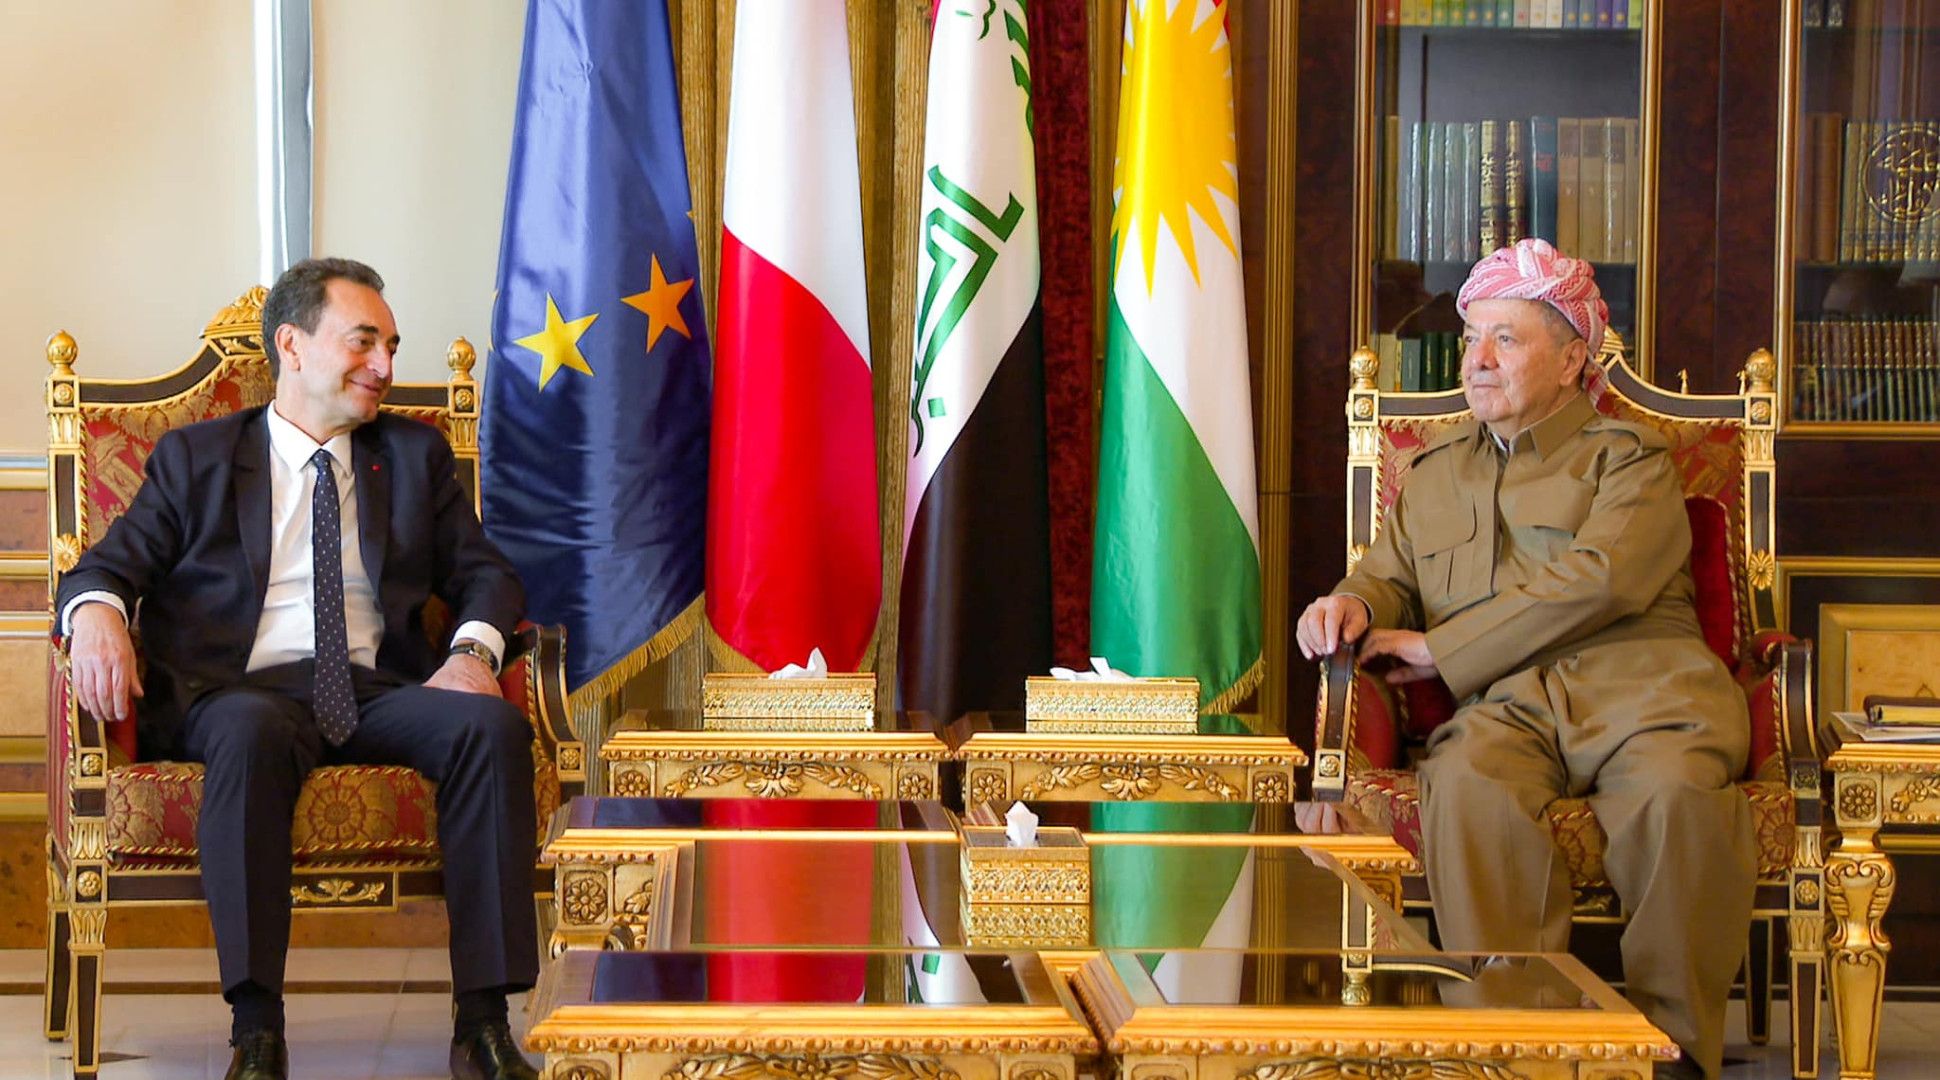 France commends Barzani's "wise" decision to de-escalate the situation in Kirkuk.